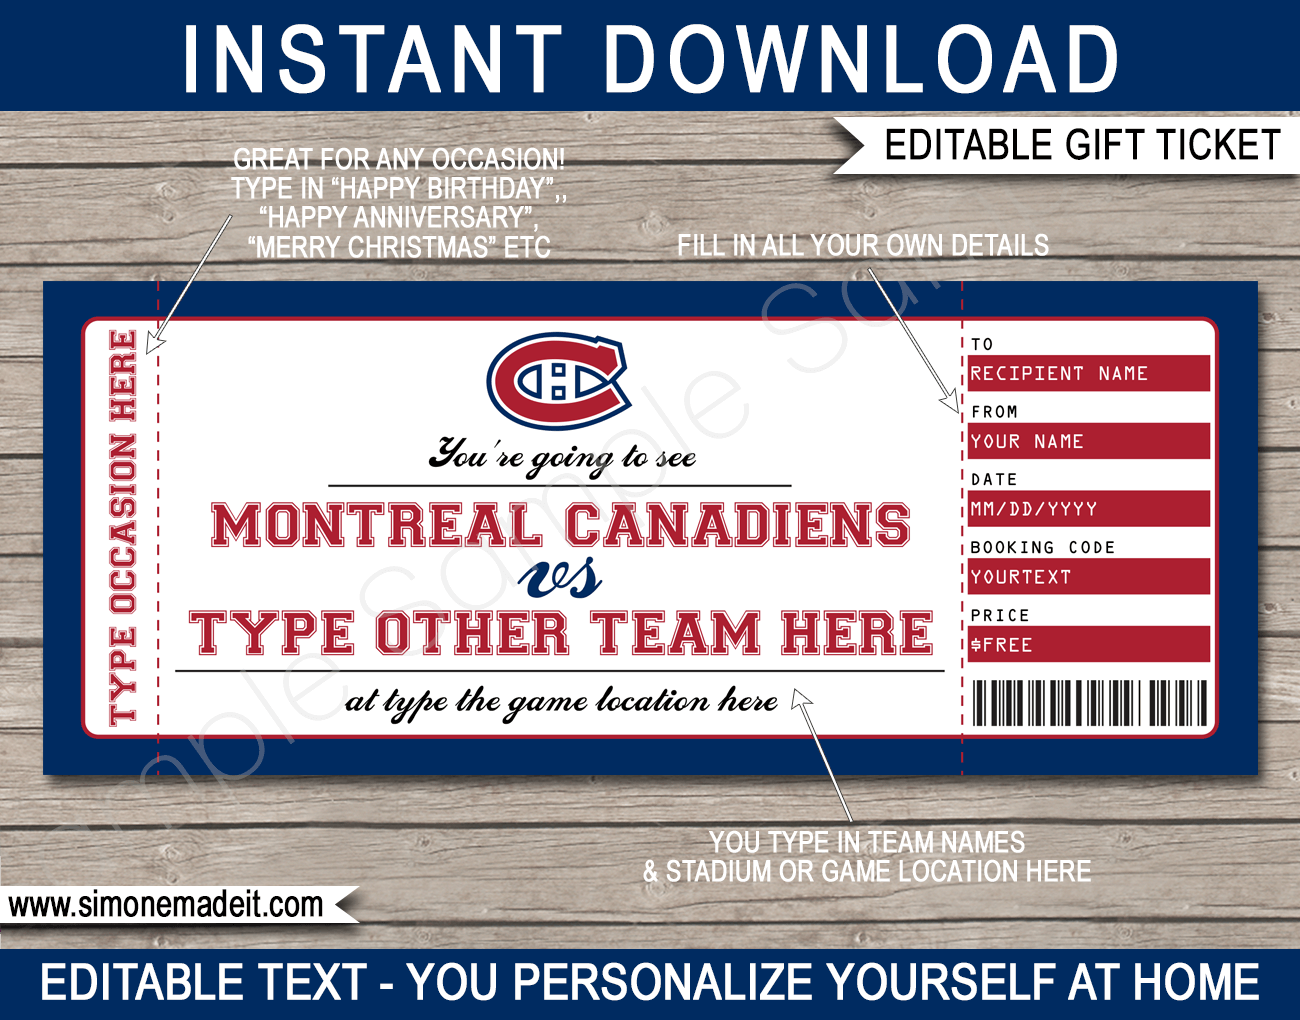 The perfect holiday gifts for the Montreal Canadiens fan